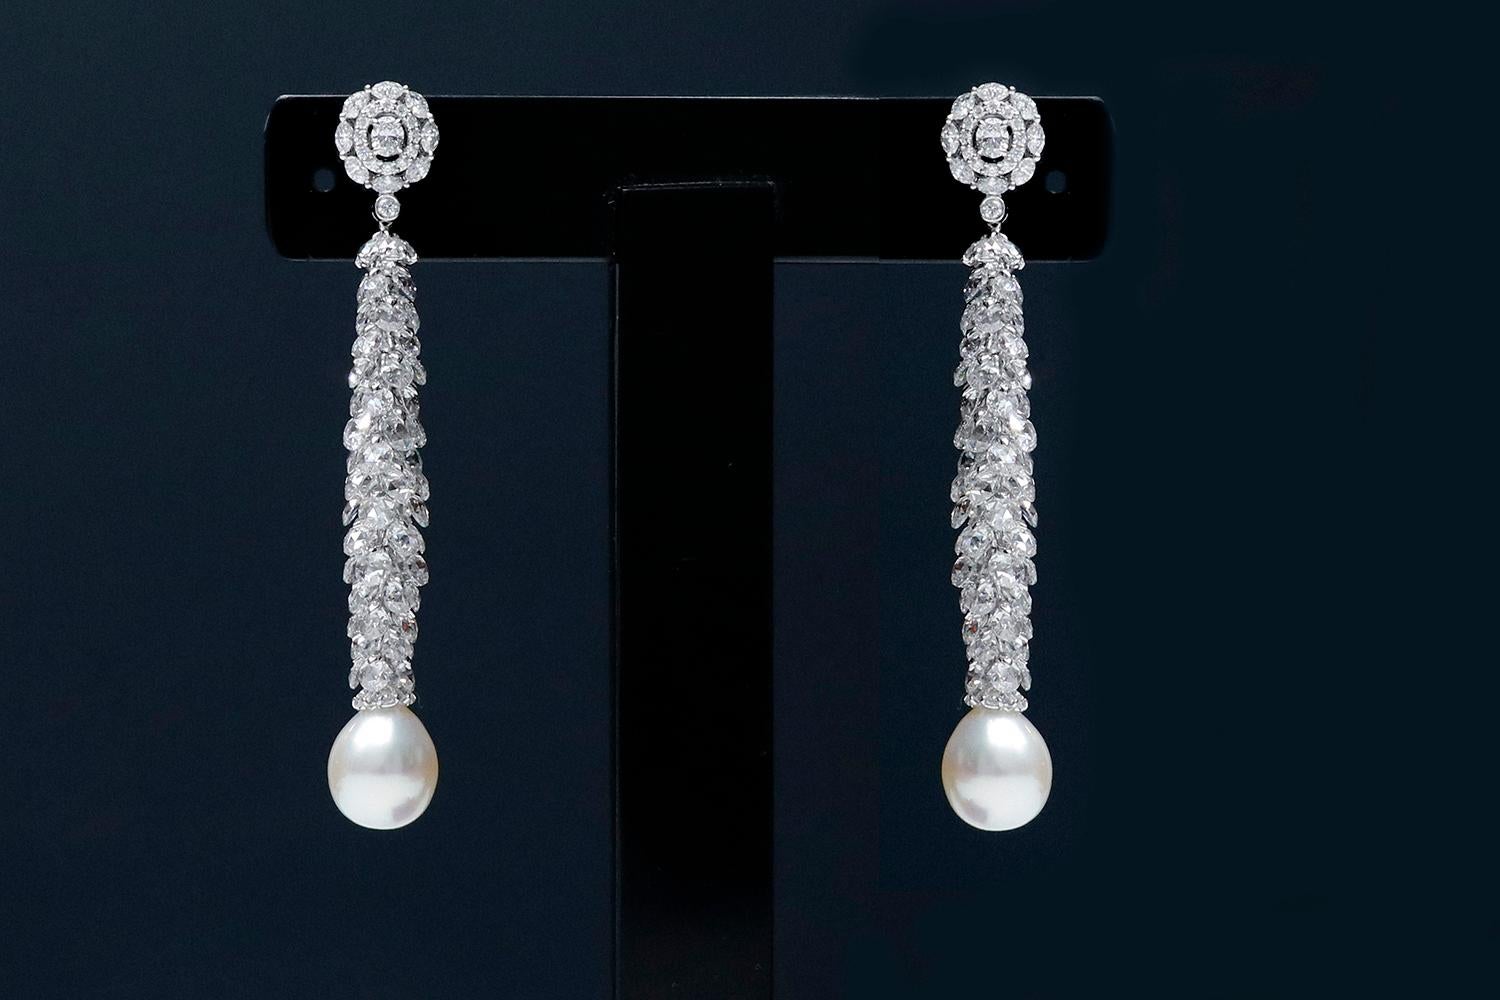 18 Karat White Gold 14.64 Carat Diamond and Pearl Cocktail Drop Earrings

This is a beyond imaginative pearl drop earring pair. The conceptualization of this design is inspired by the Christmas Fraser fir tree, which is turned upside down and